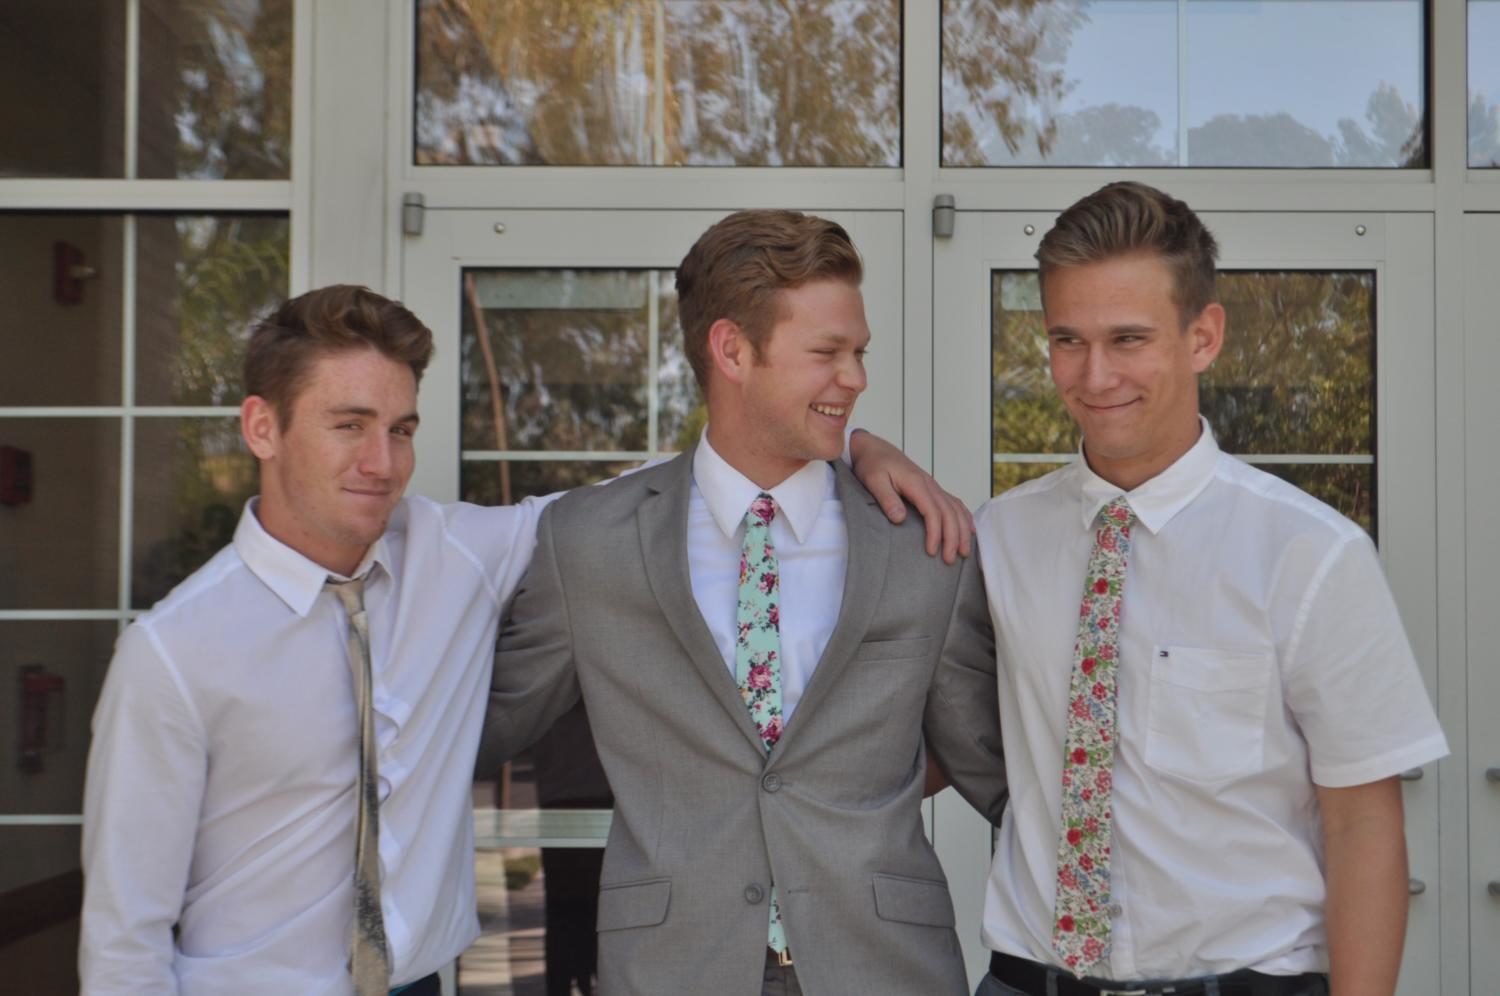 From left to right,  Cameron Buchanan, Adam Wright, and Cayden McCluskey. Pictured here in their Sunday best after church, these three SJHHS Mormon students will be joining some of their fellow students as they embark on their two year mission.